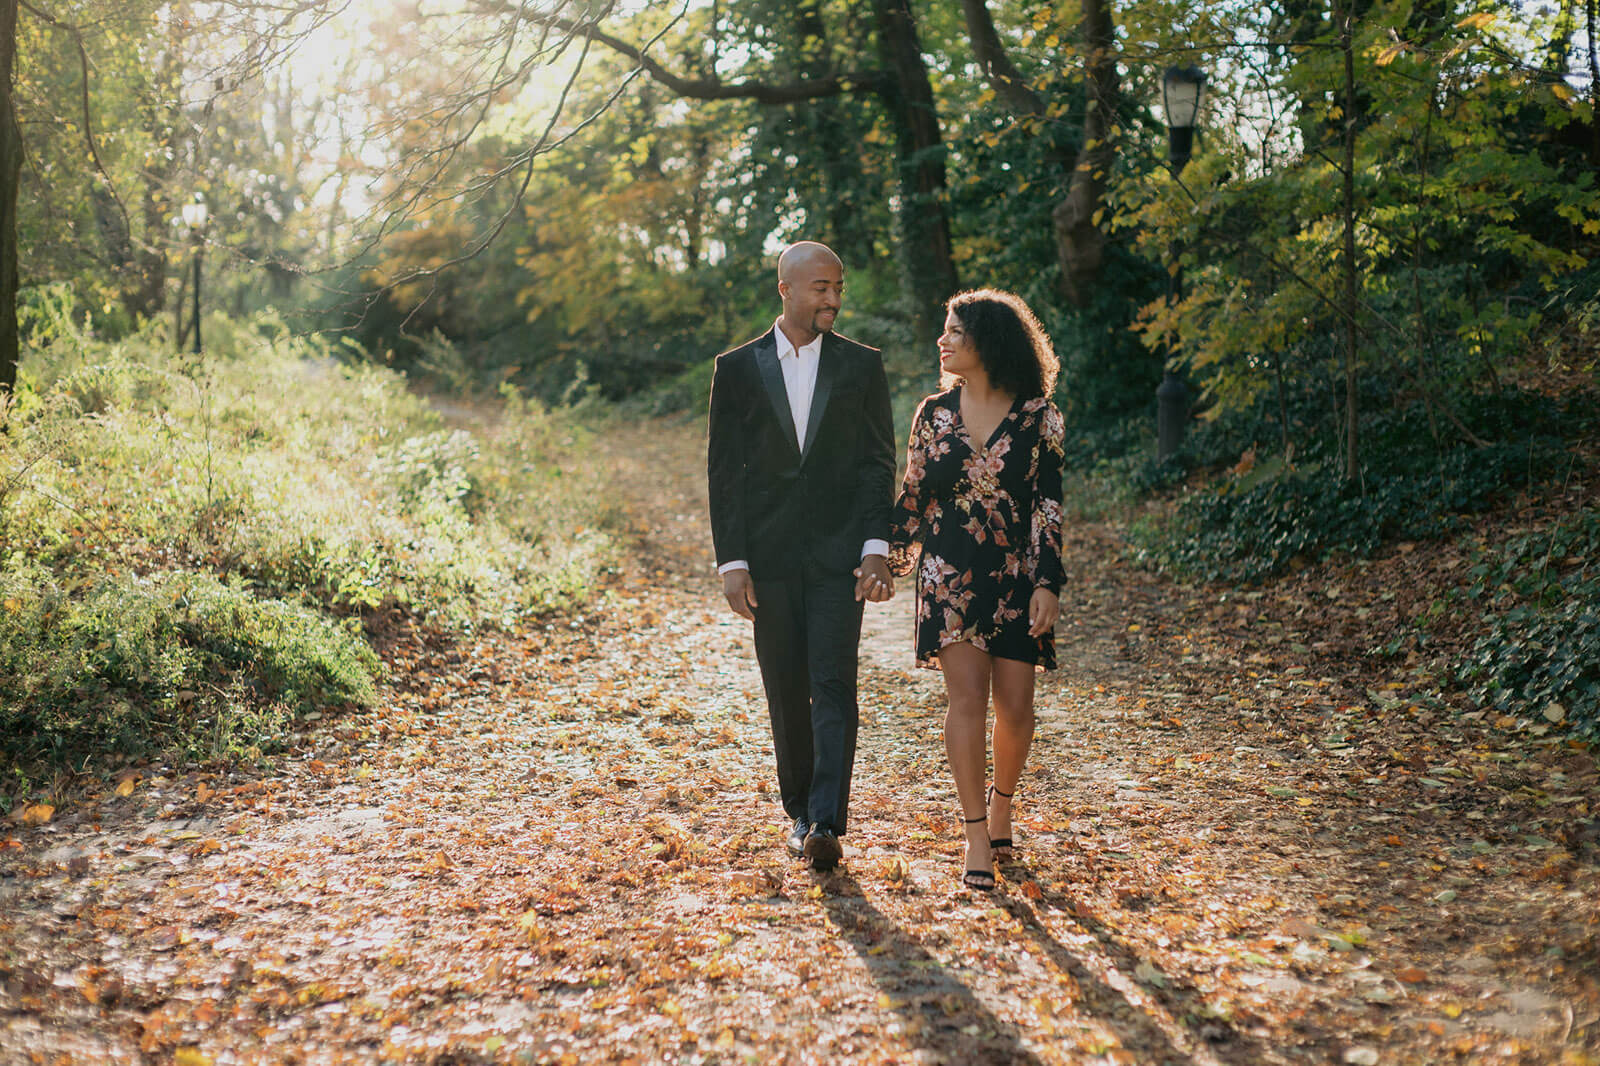 The engaged couple is happily walking in a park. NYC Christmas Engagement Photos by Jenny Fu Studio  